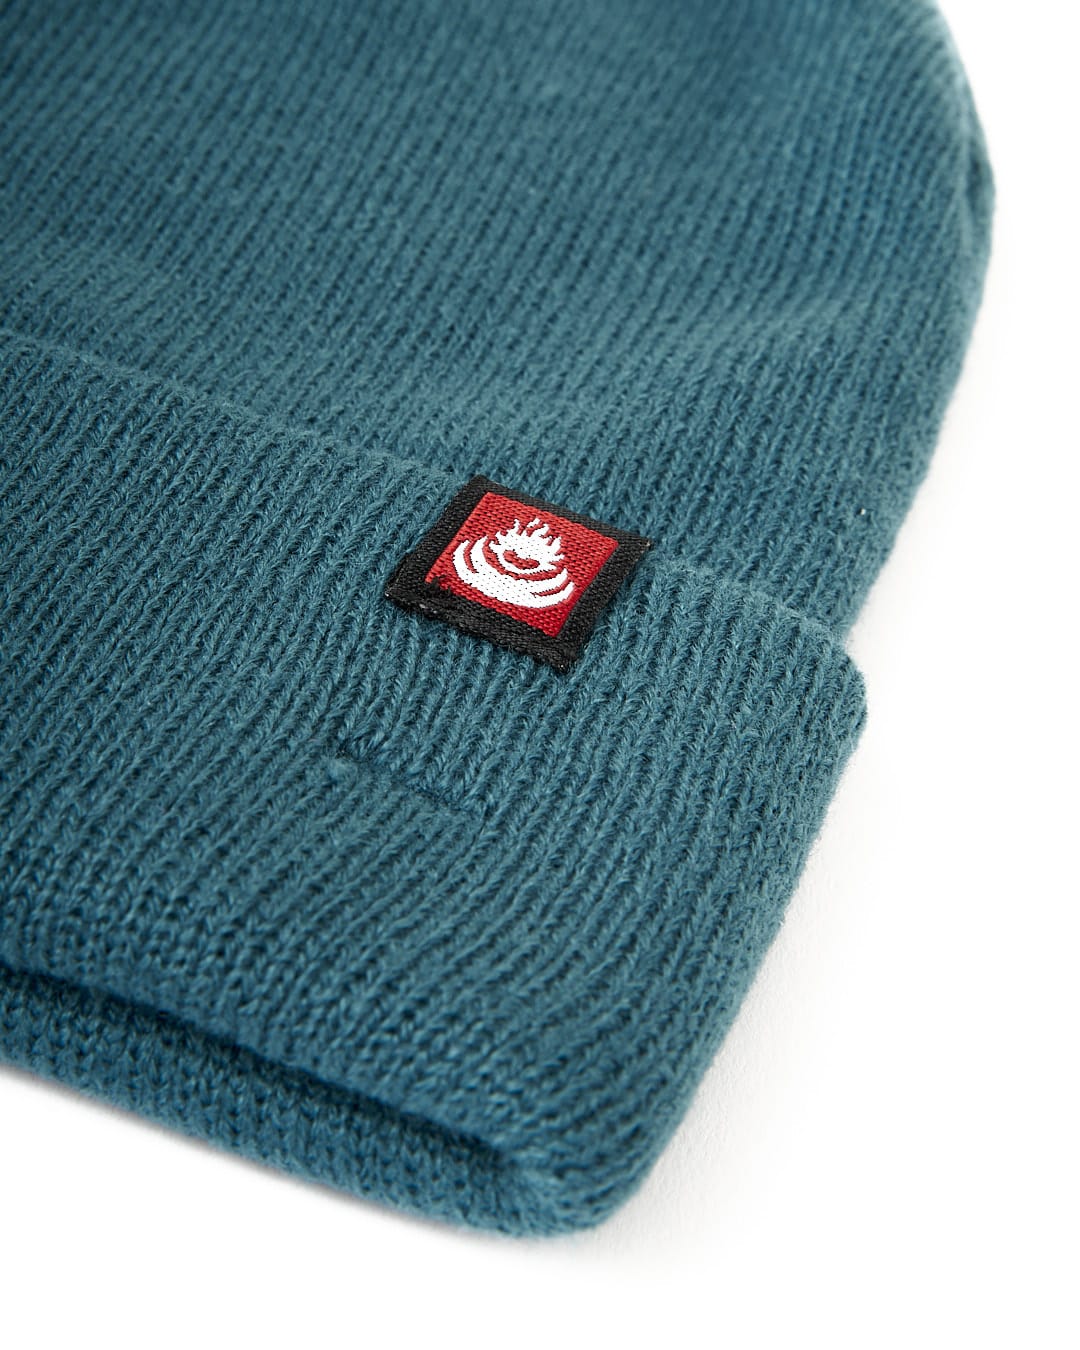 A Saltrock Tight Knit Beanie in Teal with a red logo, perfect for staying cozy in the winter.